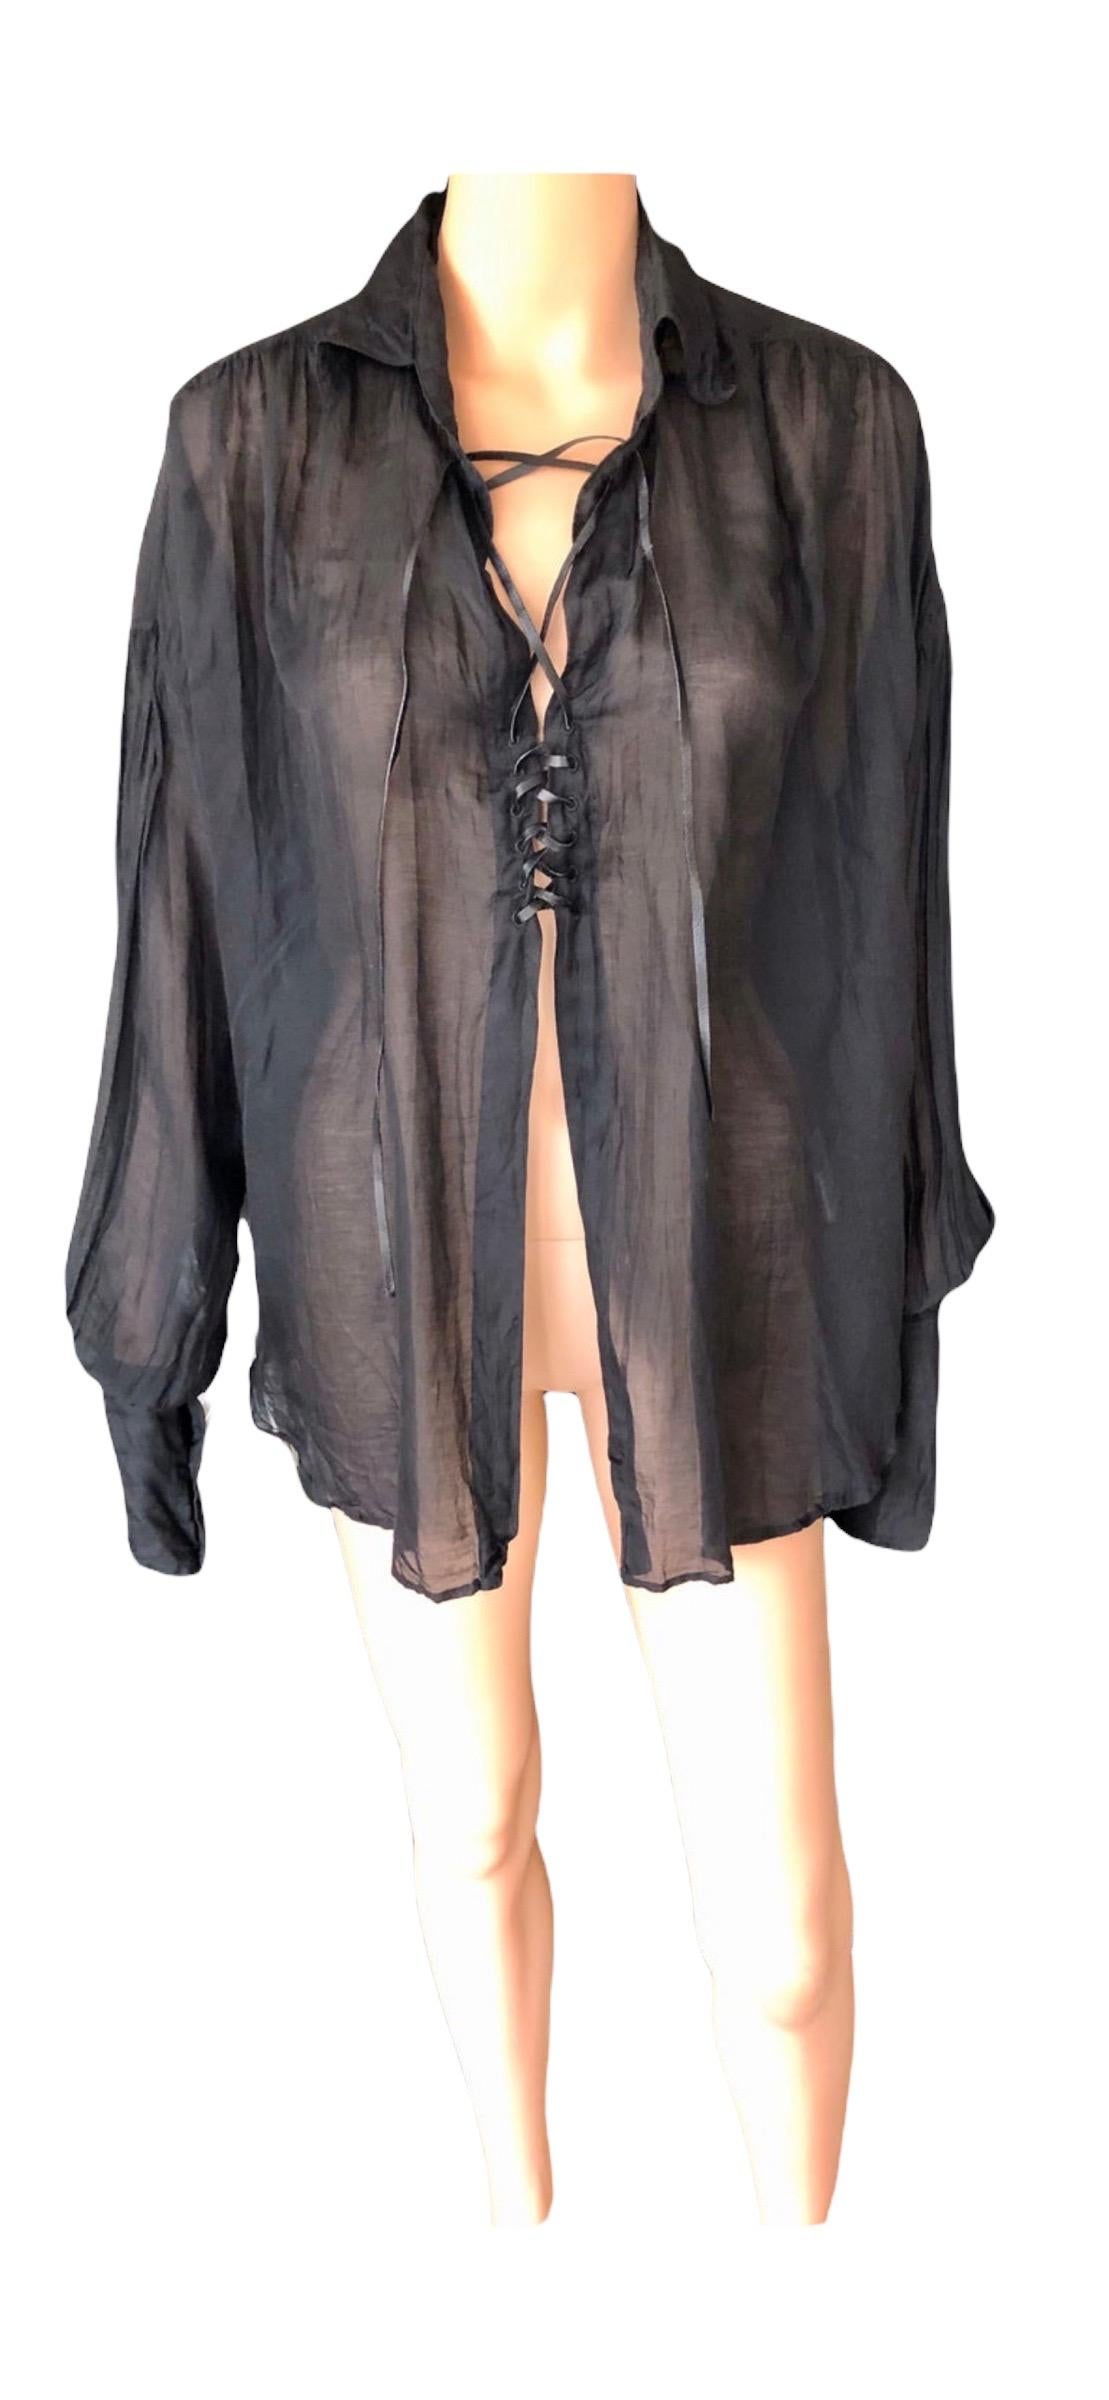 Women's Tom Ford for Gucci F/W 2002 Sheer Plunging Lace-Up Black Tunic Shirt Blouse Top